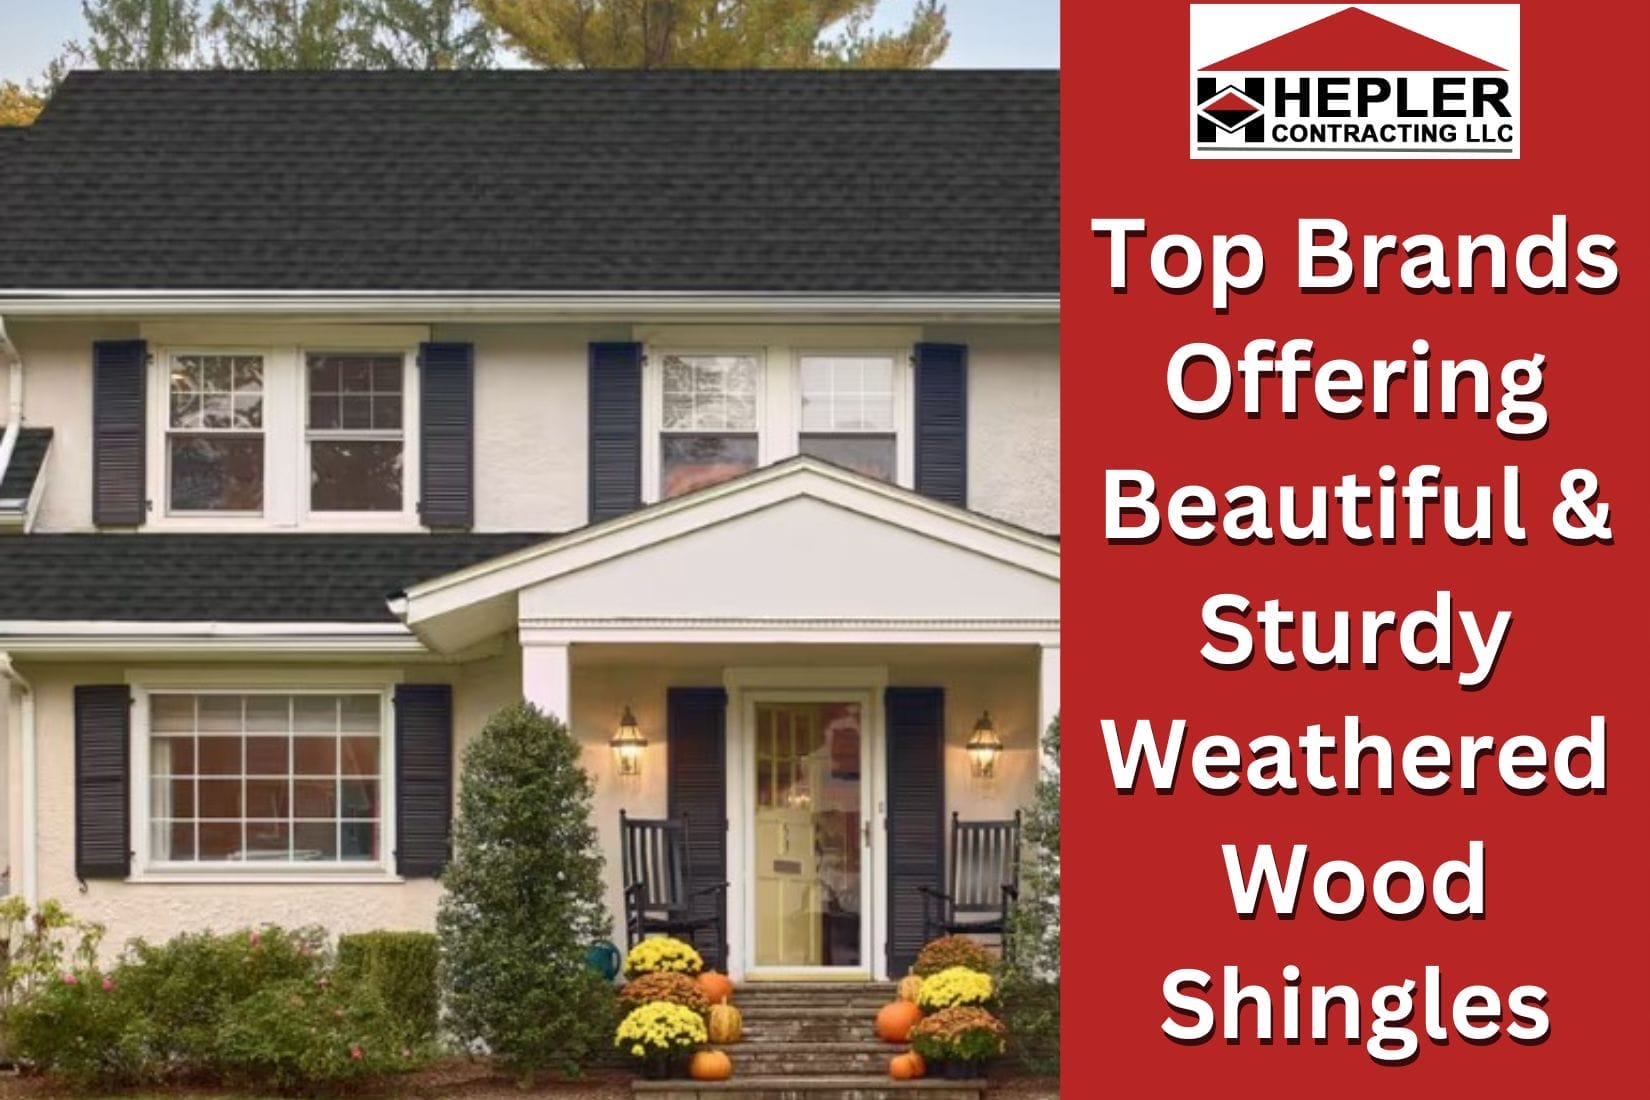 Top Brands Offering Beautiful & Sturdy Weathered Wood Shingles